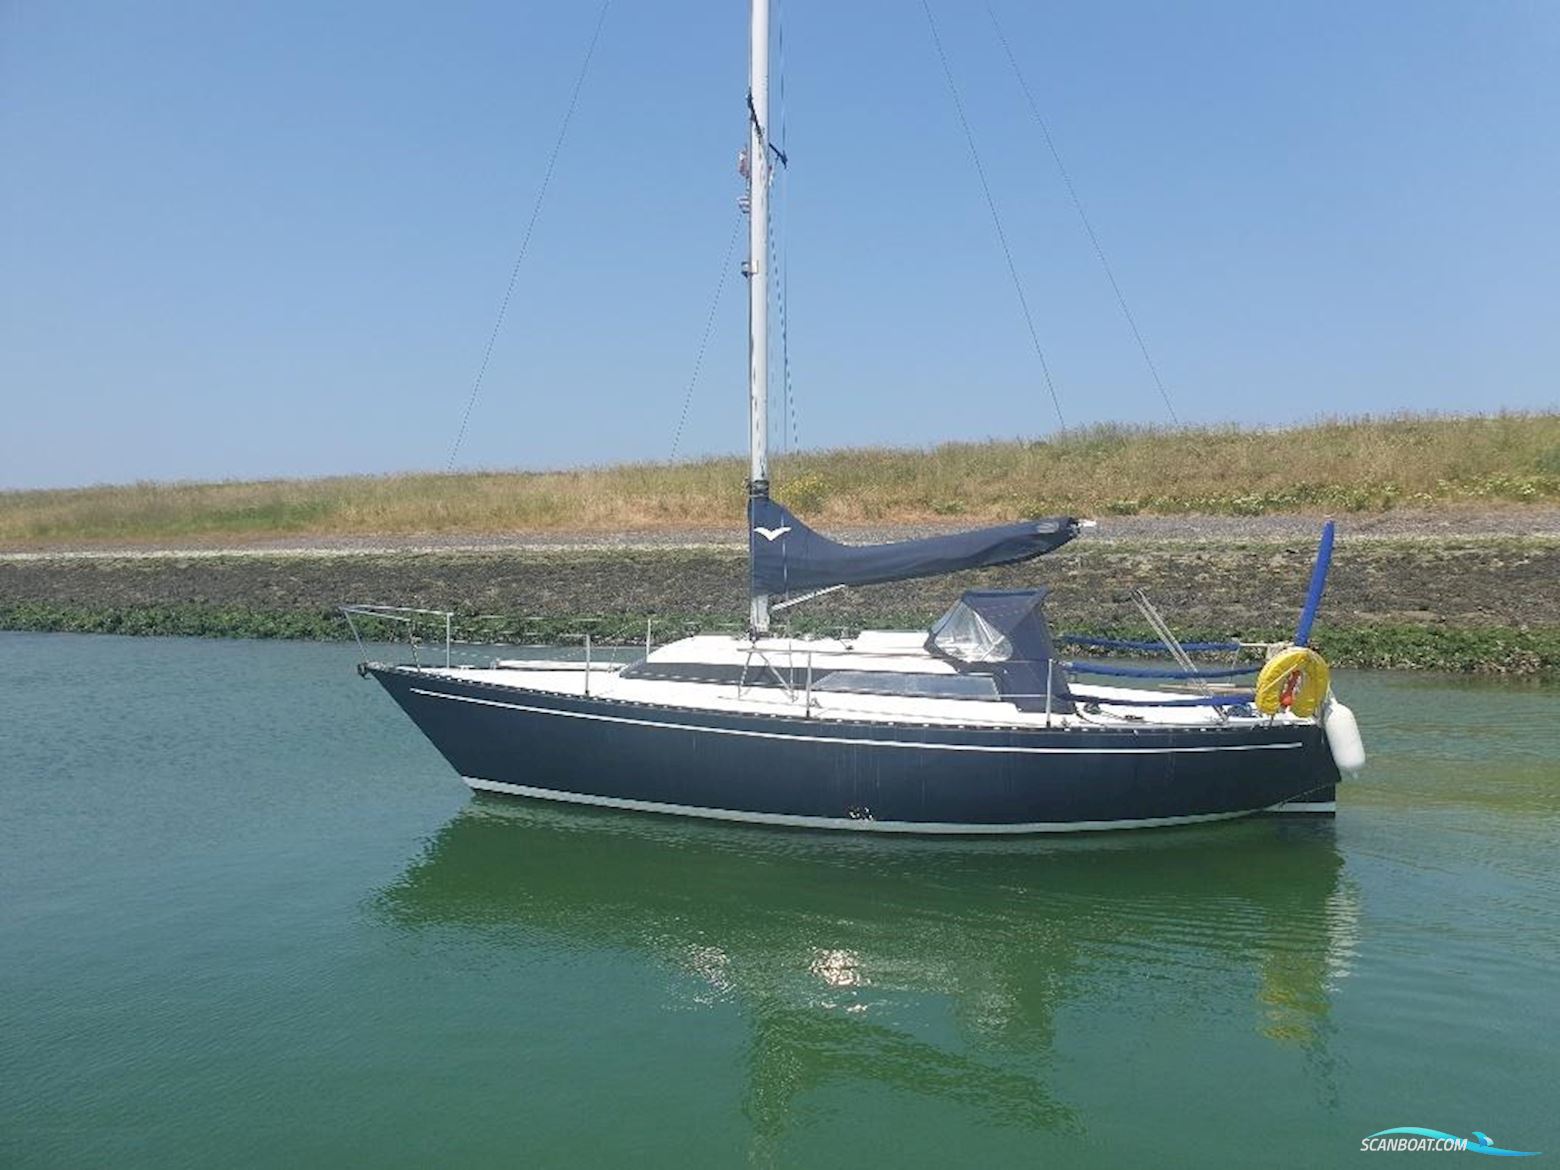 Standfast Loper 27 Sailing boat 1979, with Renault engine, The Netherlands